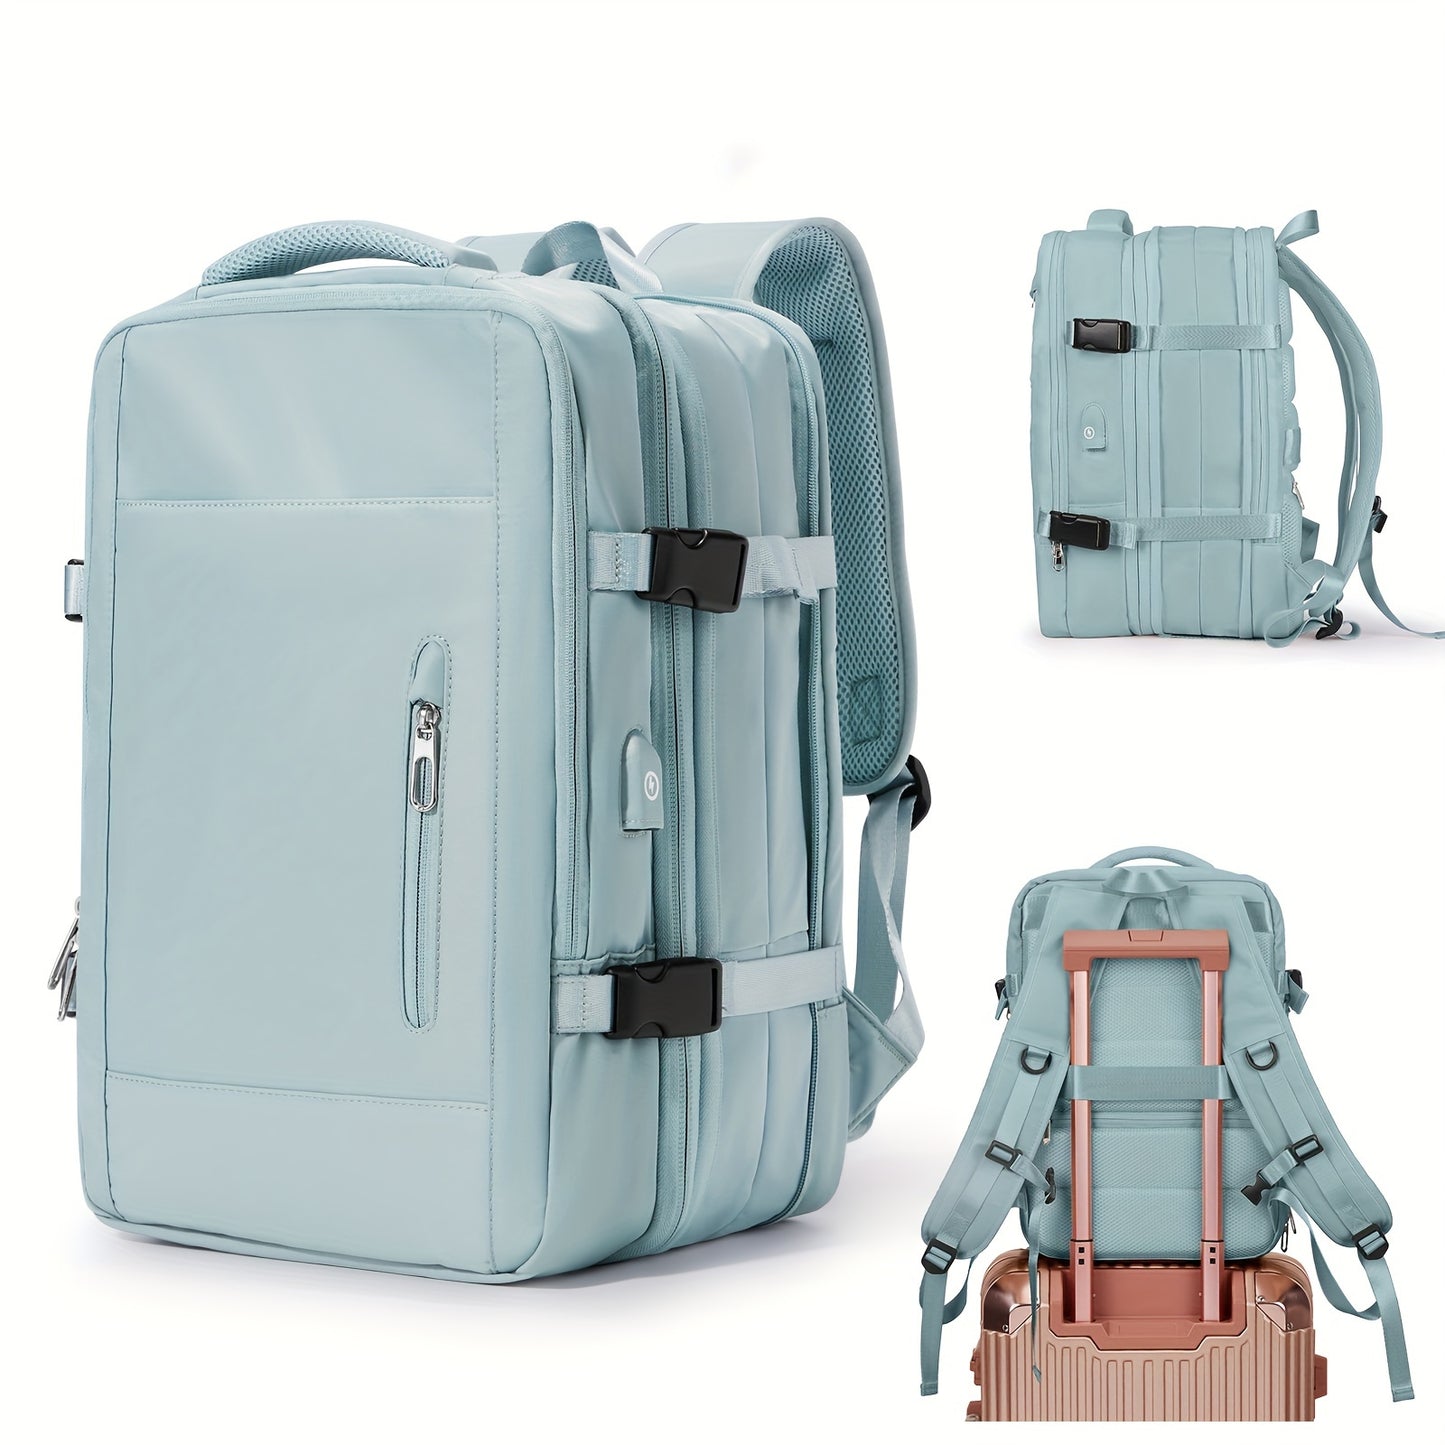 Waterproof Travel Backpack - Durable & Stylish, Spacious for Short Trips, Laptop Compartment, Airplane Approved - Perfect for Ladies, Men, College Students & Business Travelers